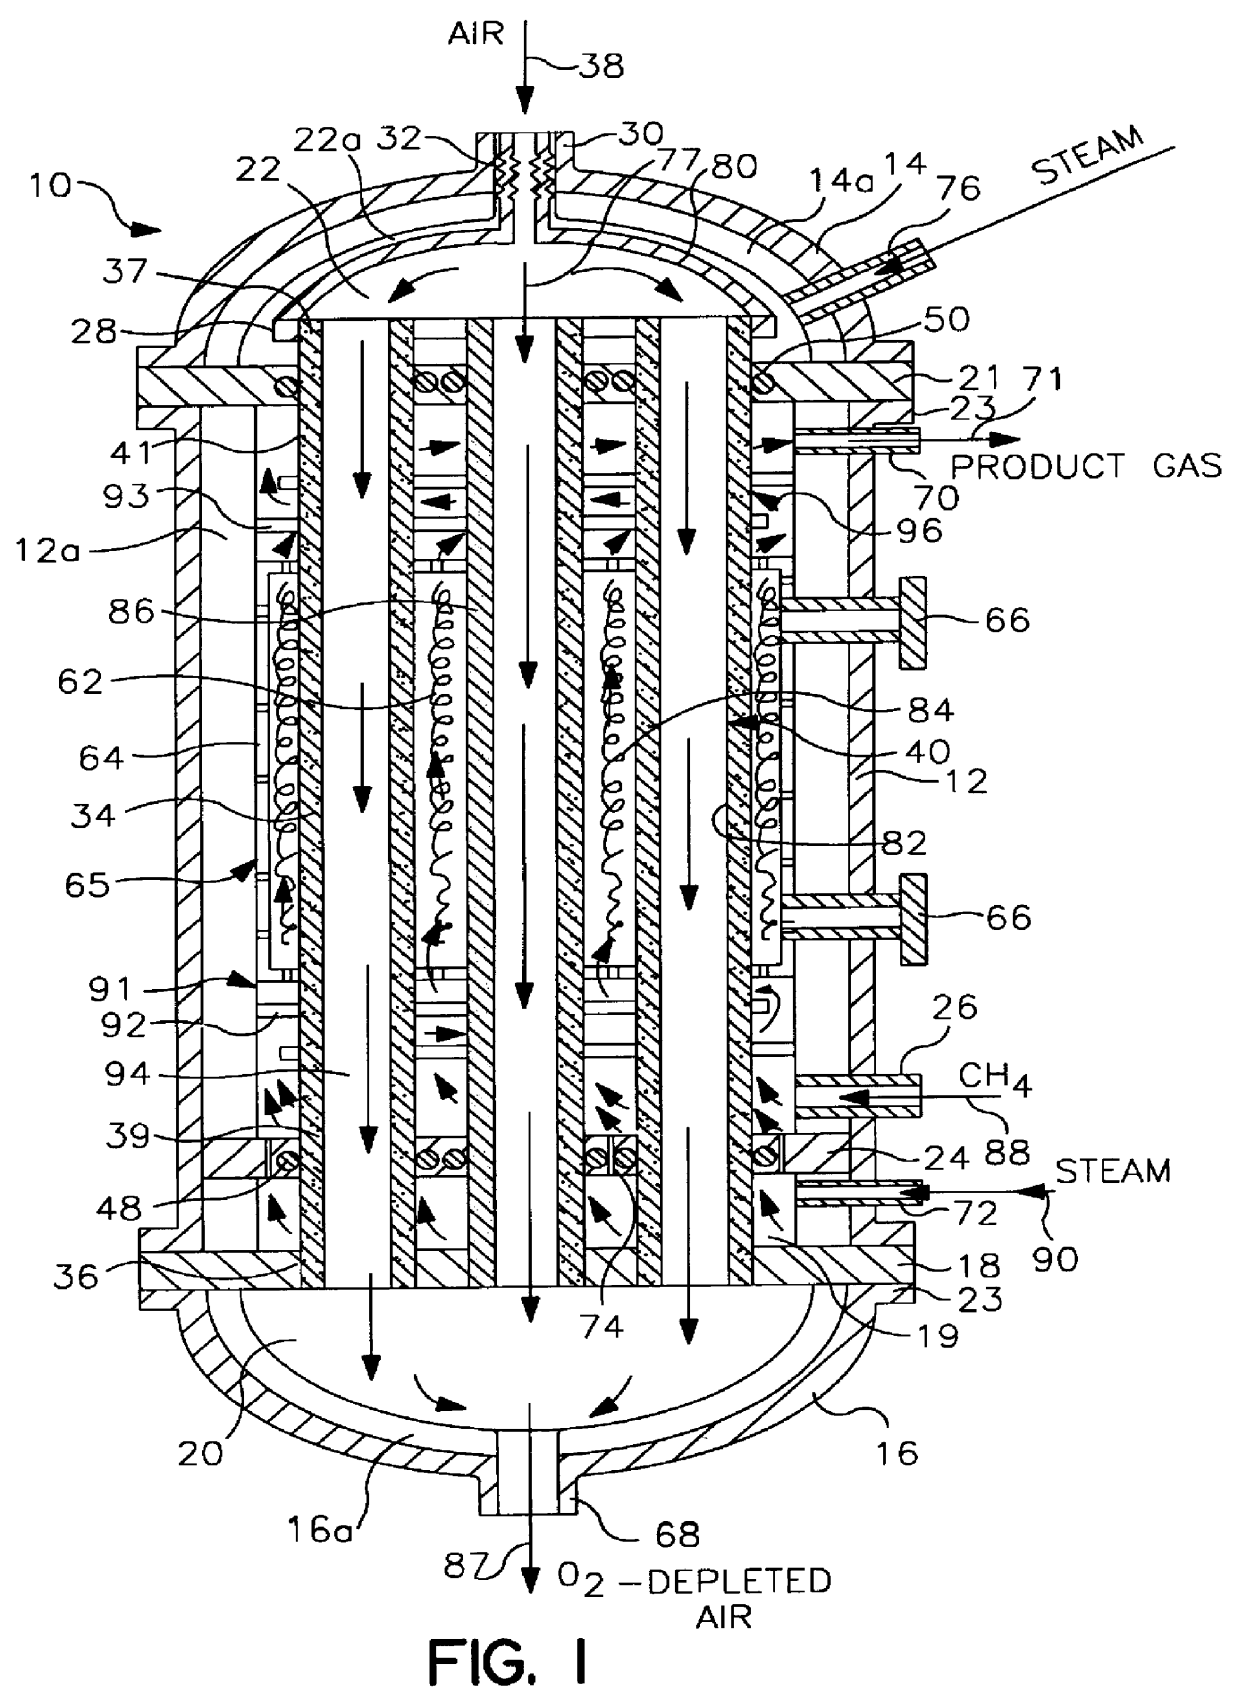 Tube and shell reactor with oxygen selective ion transport ceramic reaction tubes